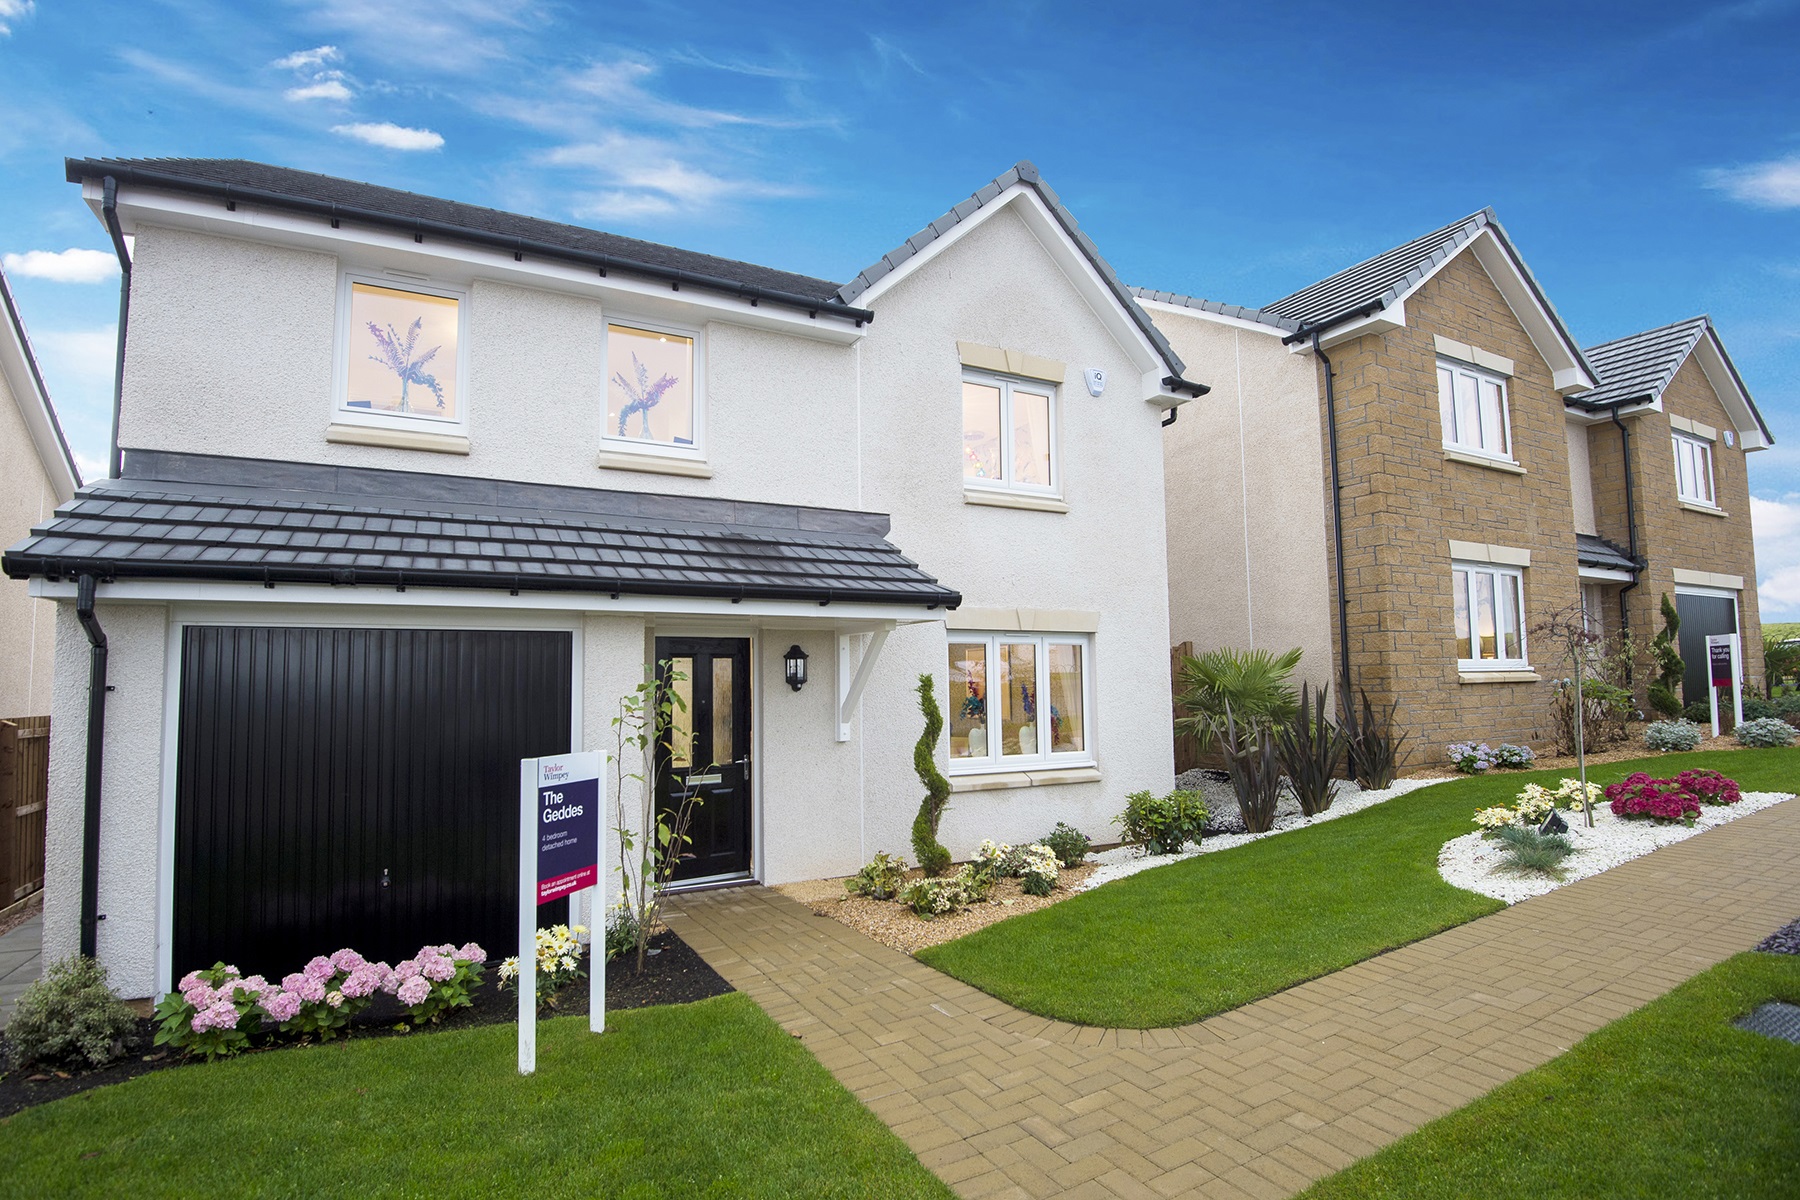 Taylor Wimpey to deliver over 100 new homes in Macmerry